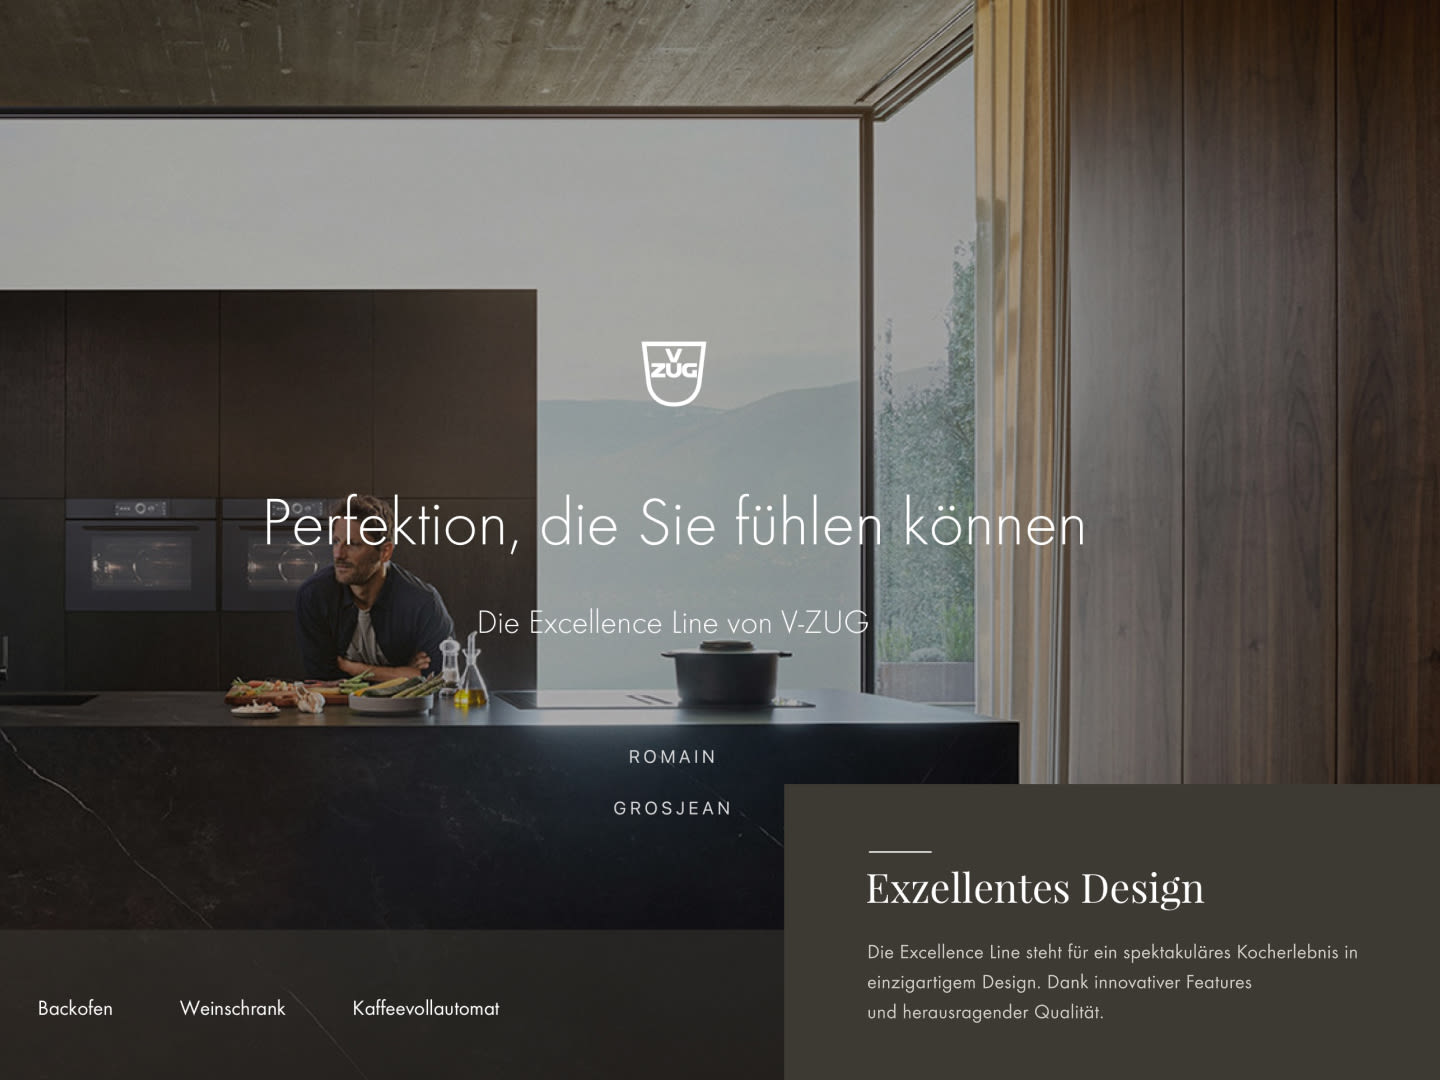 Image of the website V-ZUG with a kitchen in the background. In the foreground the slogan: "Perfection you can feel".